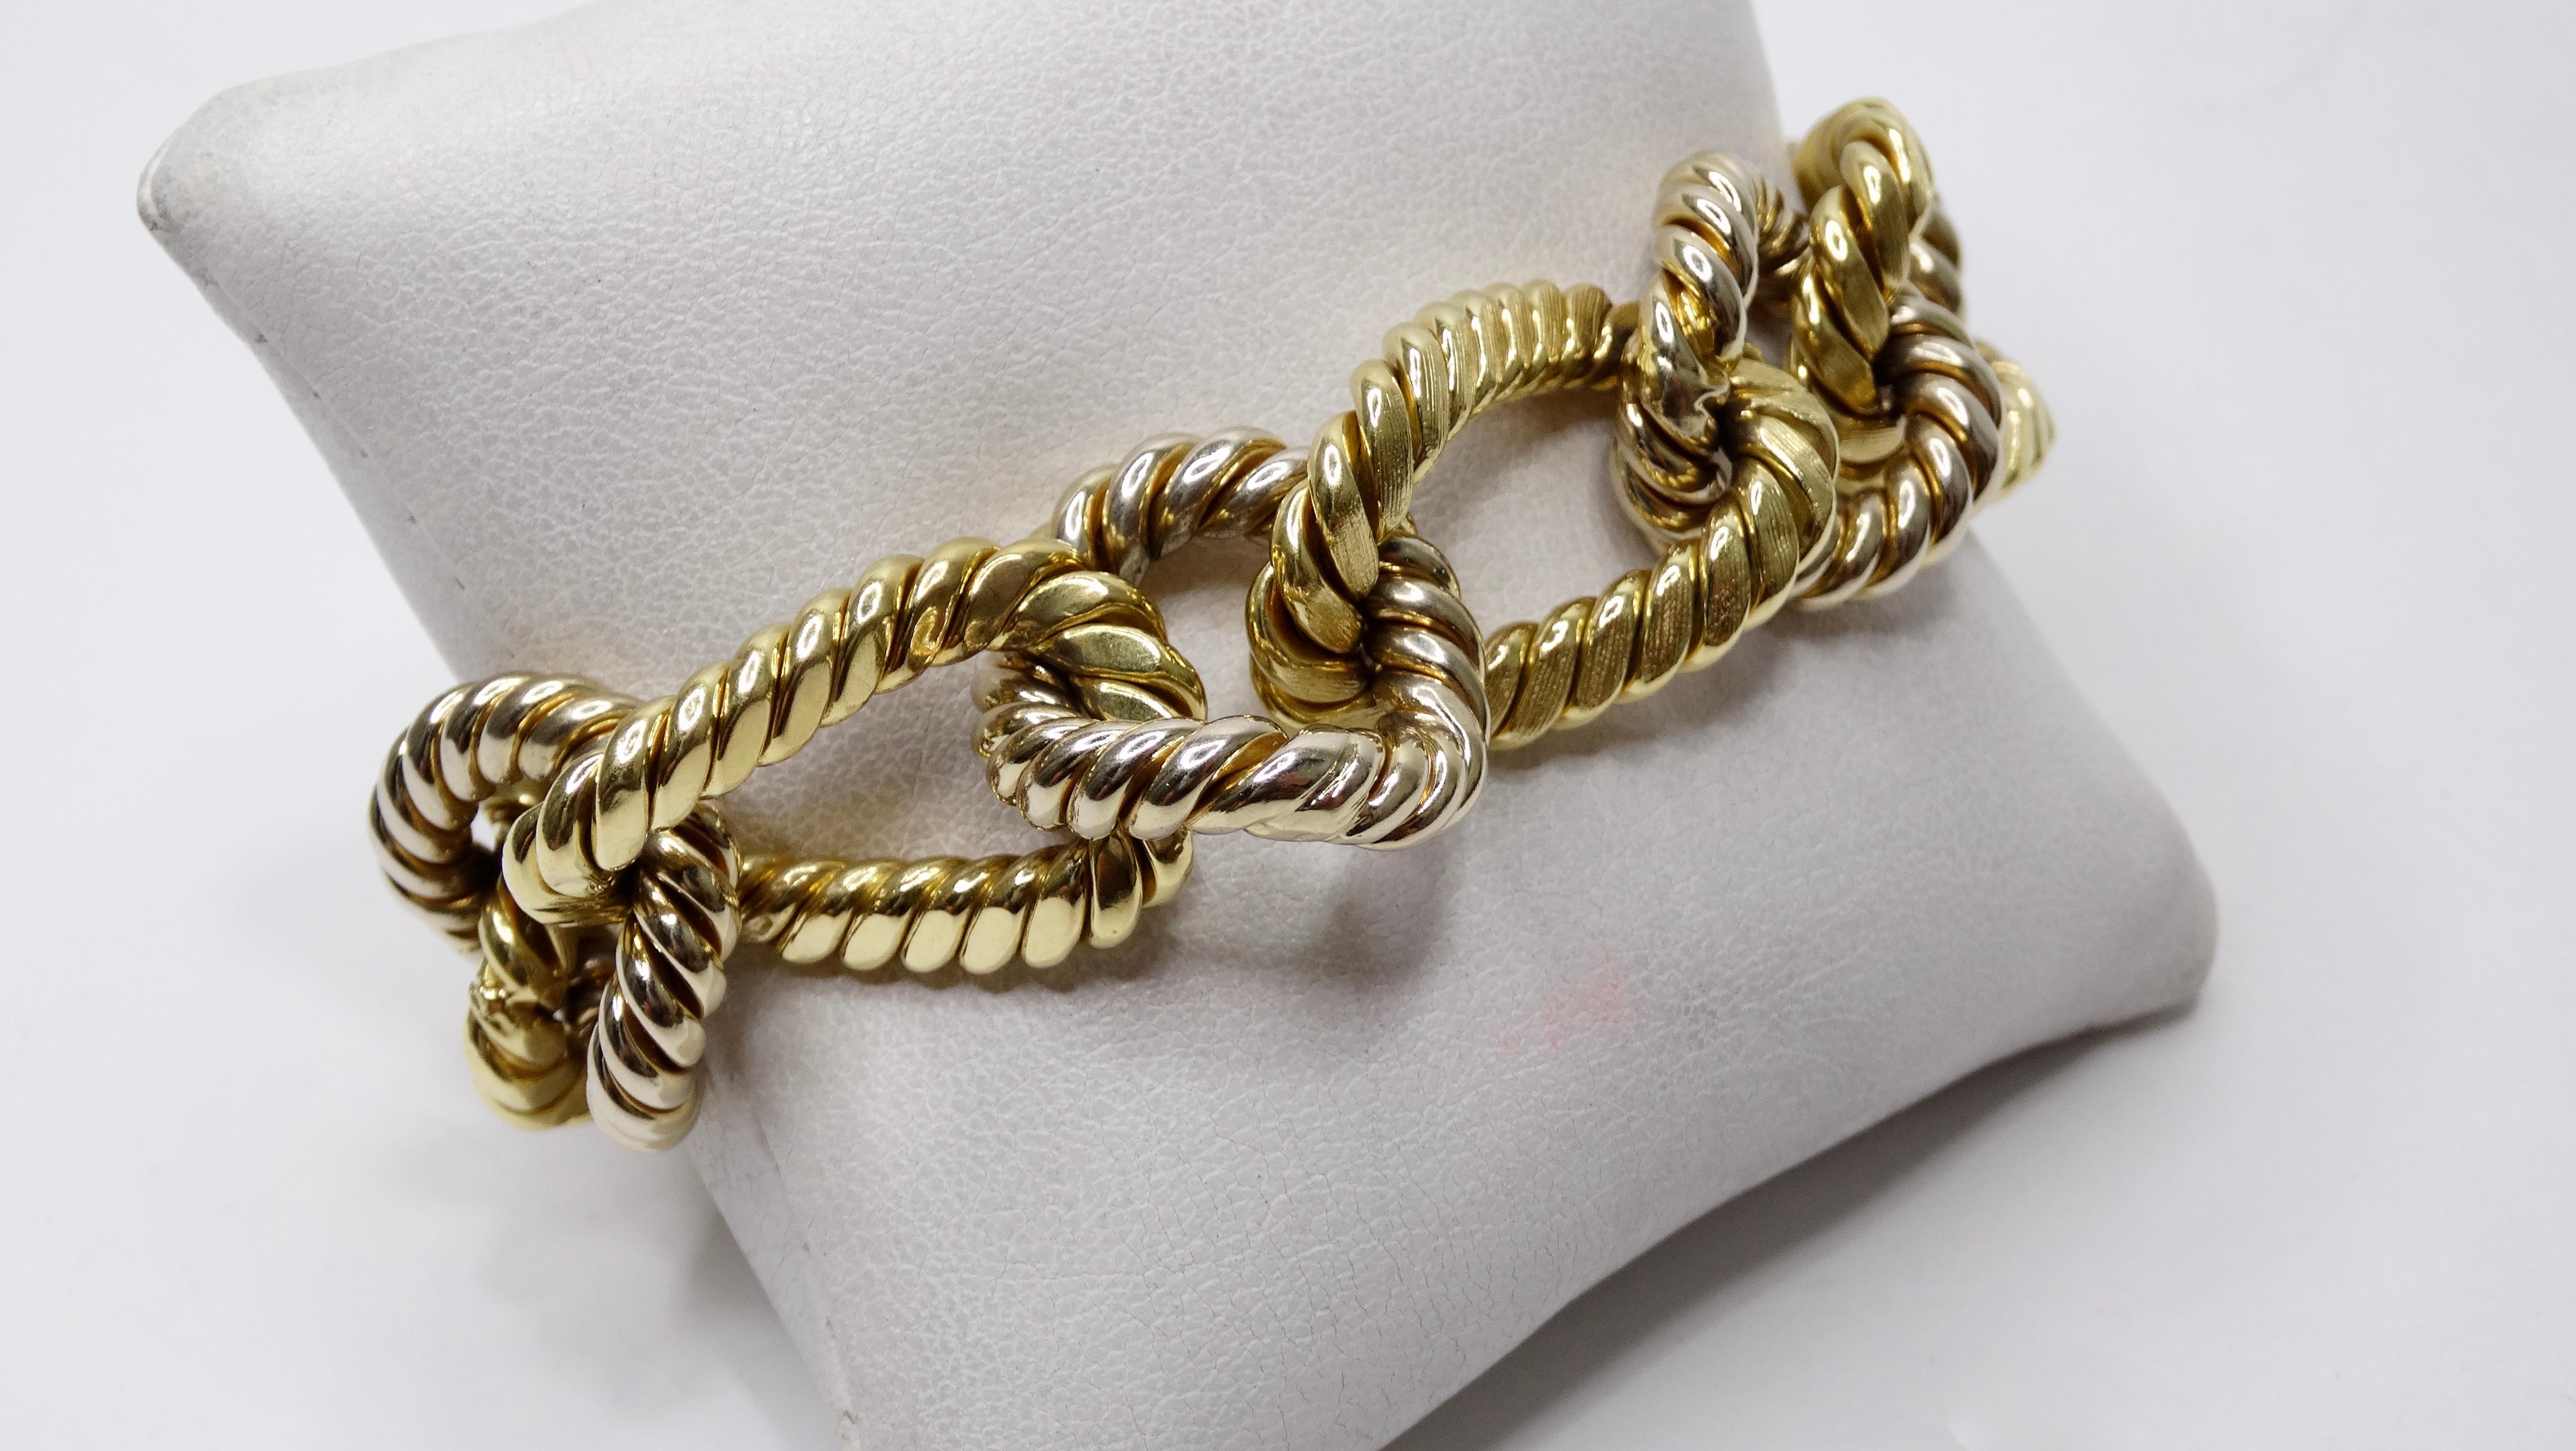  Circa late 20th century from Italy, this vintage bracelet features two tone 18k Gold chain links embossed with a rope pattern and finished with a tab closure and security latch. Edgy and classic, this Bvglari style bracelet will look great with all